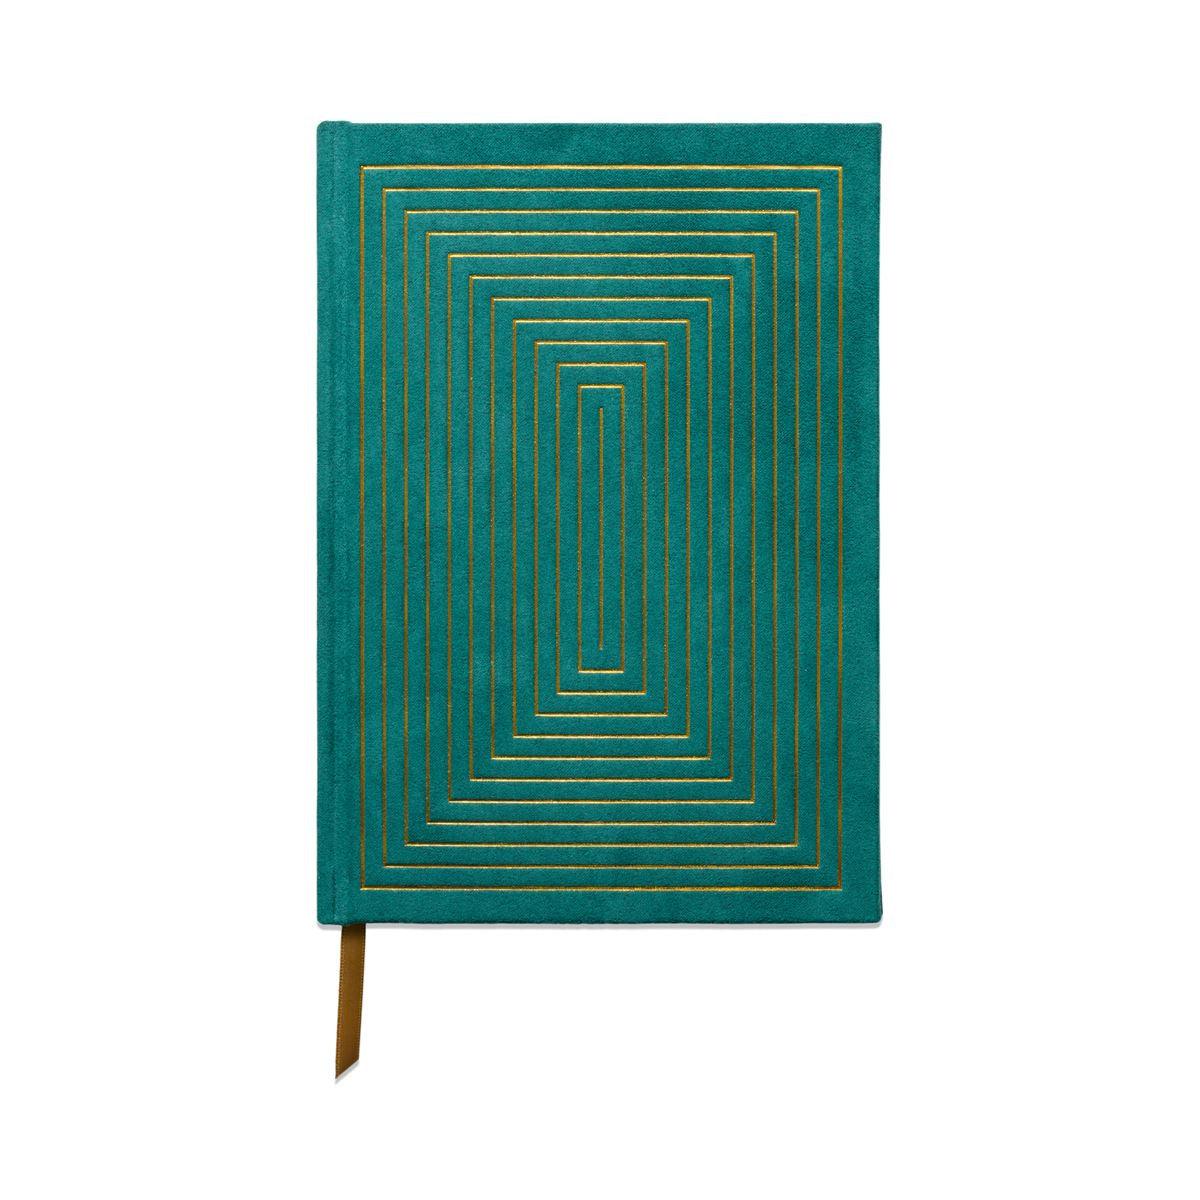 Hard Cover Suede Cloth Journal With Pocket - Linear Boxes Green - Handworks Nouveau Paperie